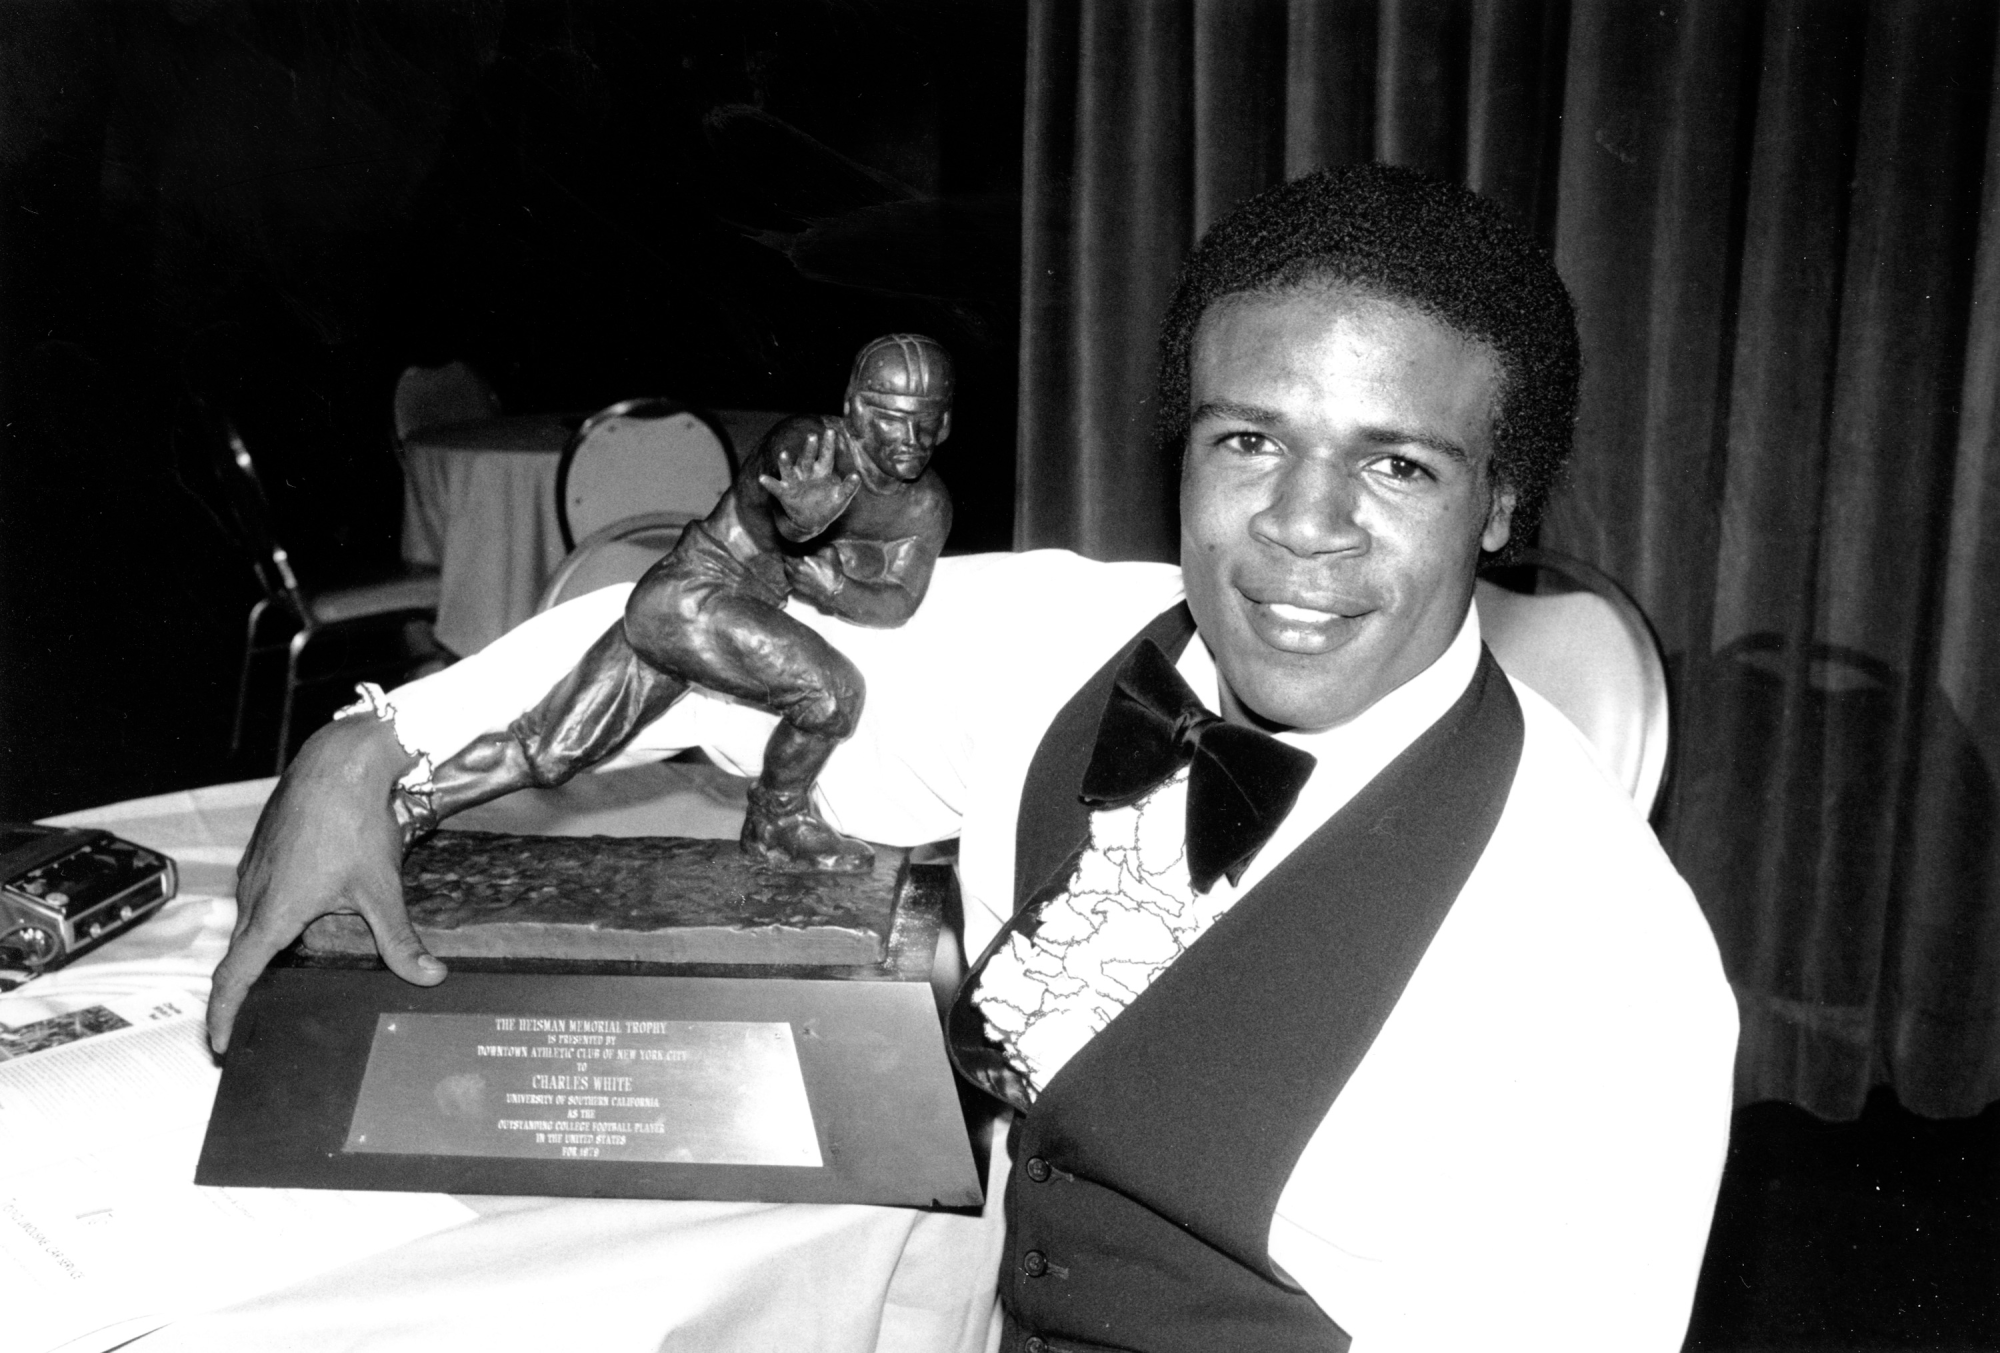 USC running back Charles White poses with the Heisman Trophy on Dec. 12, 1979, in New York.